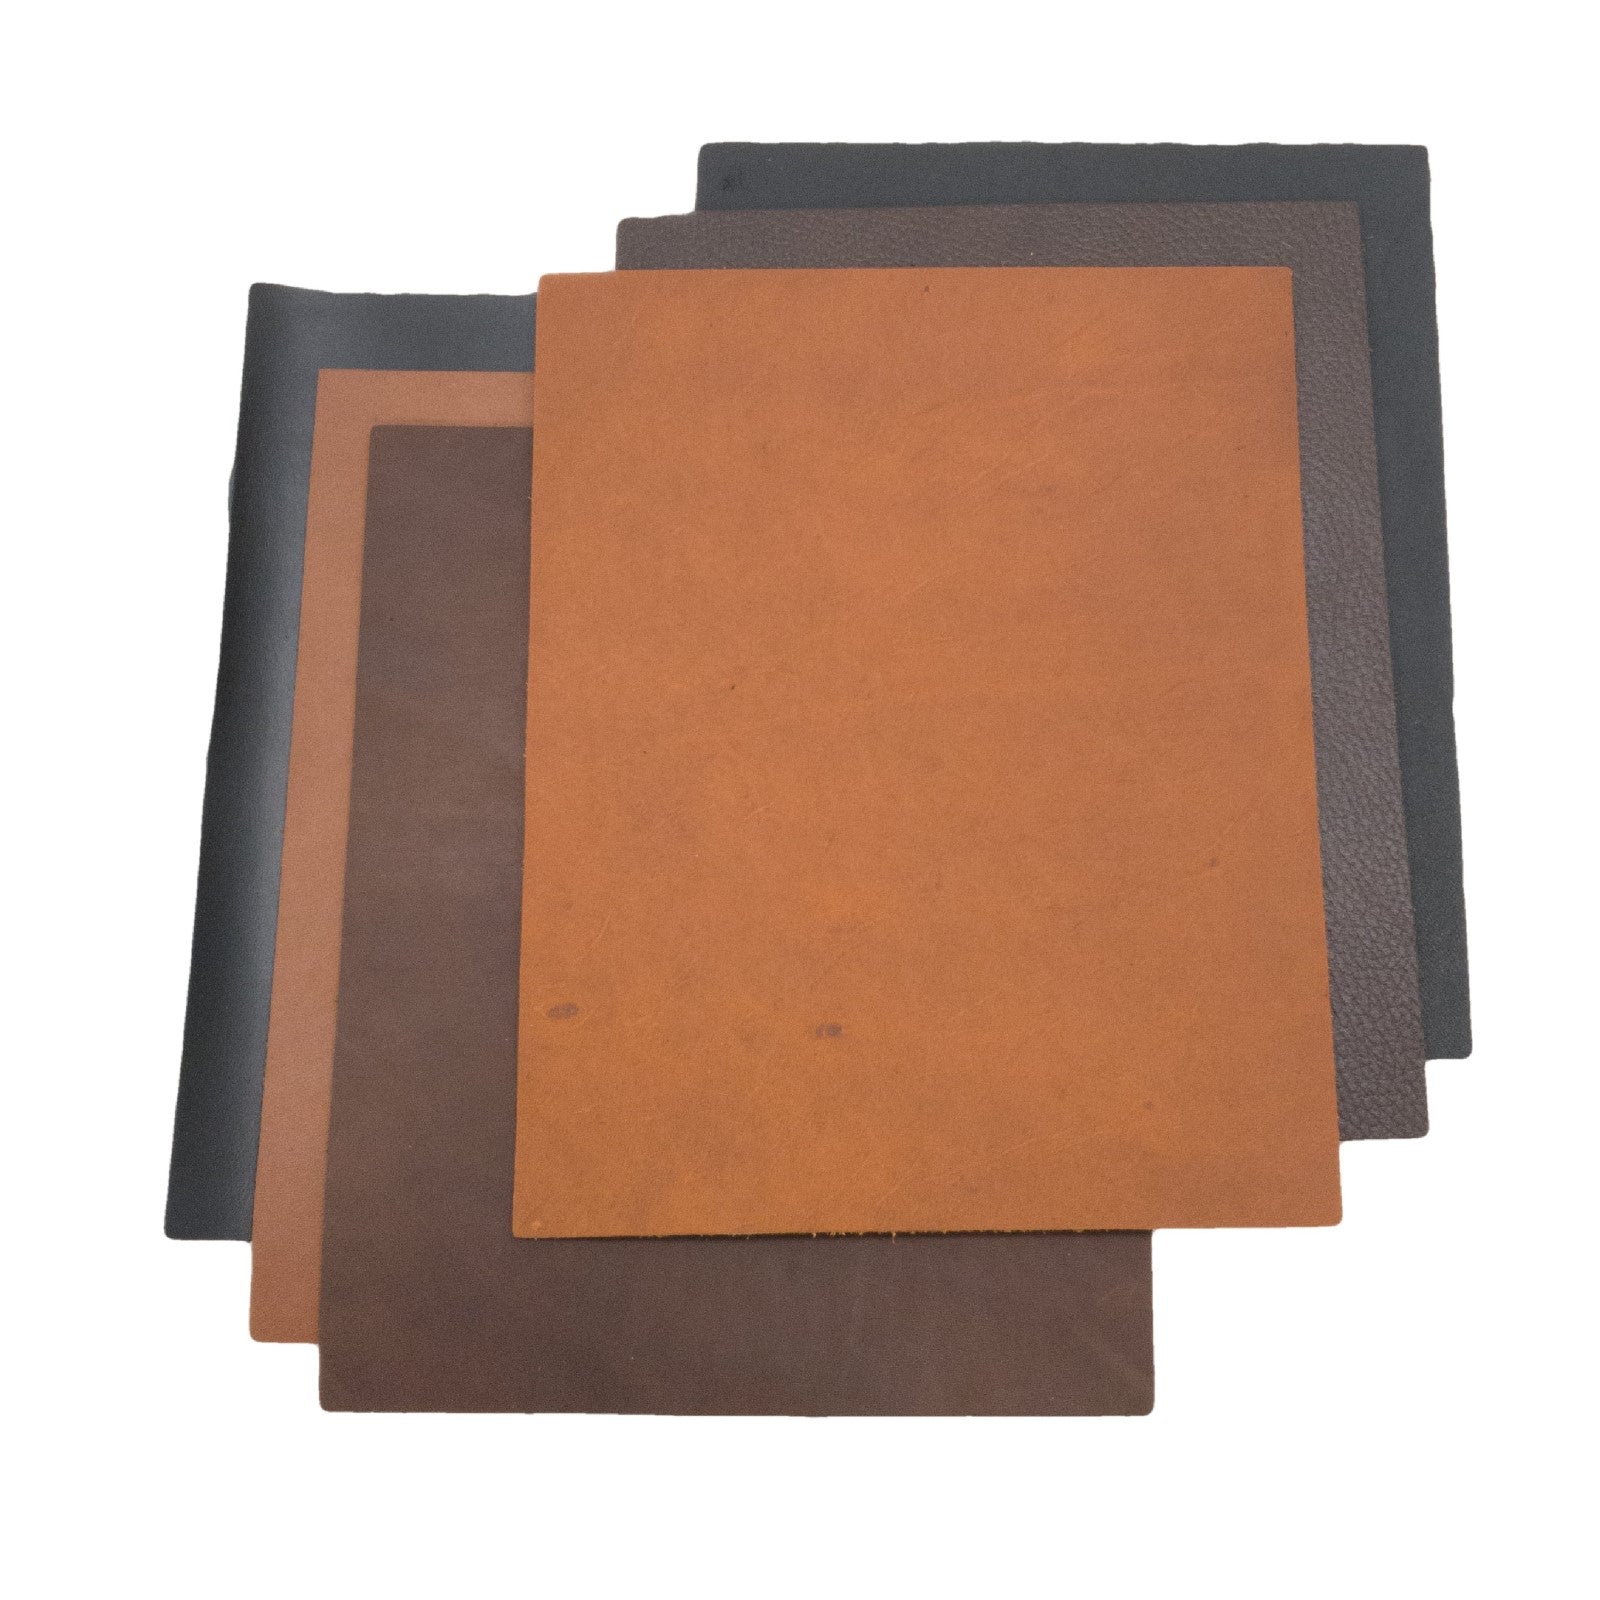 SB Foot Non-stock, Oil Tanned, Pre-cuts - Various Sizes,  | The Leather Guy